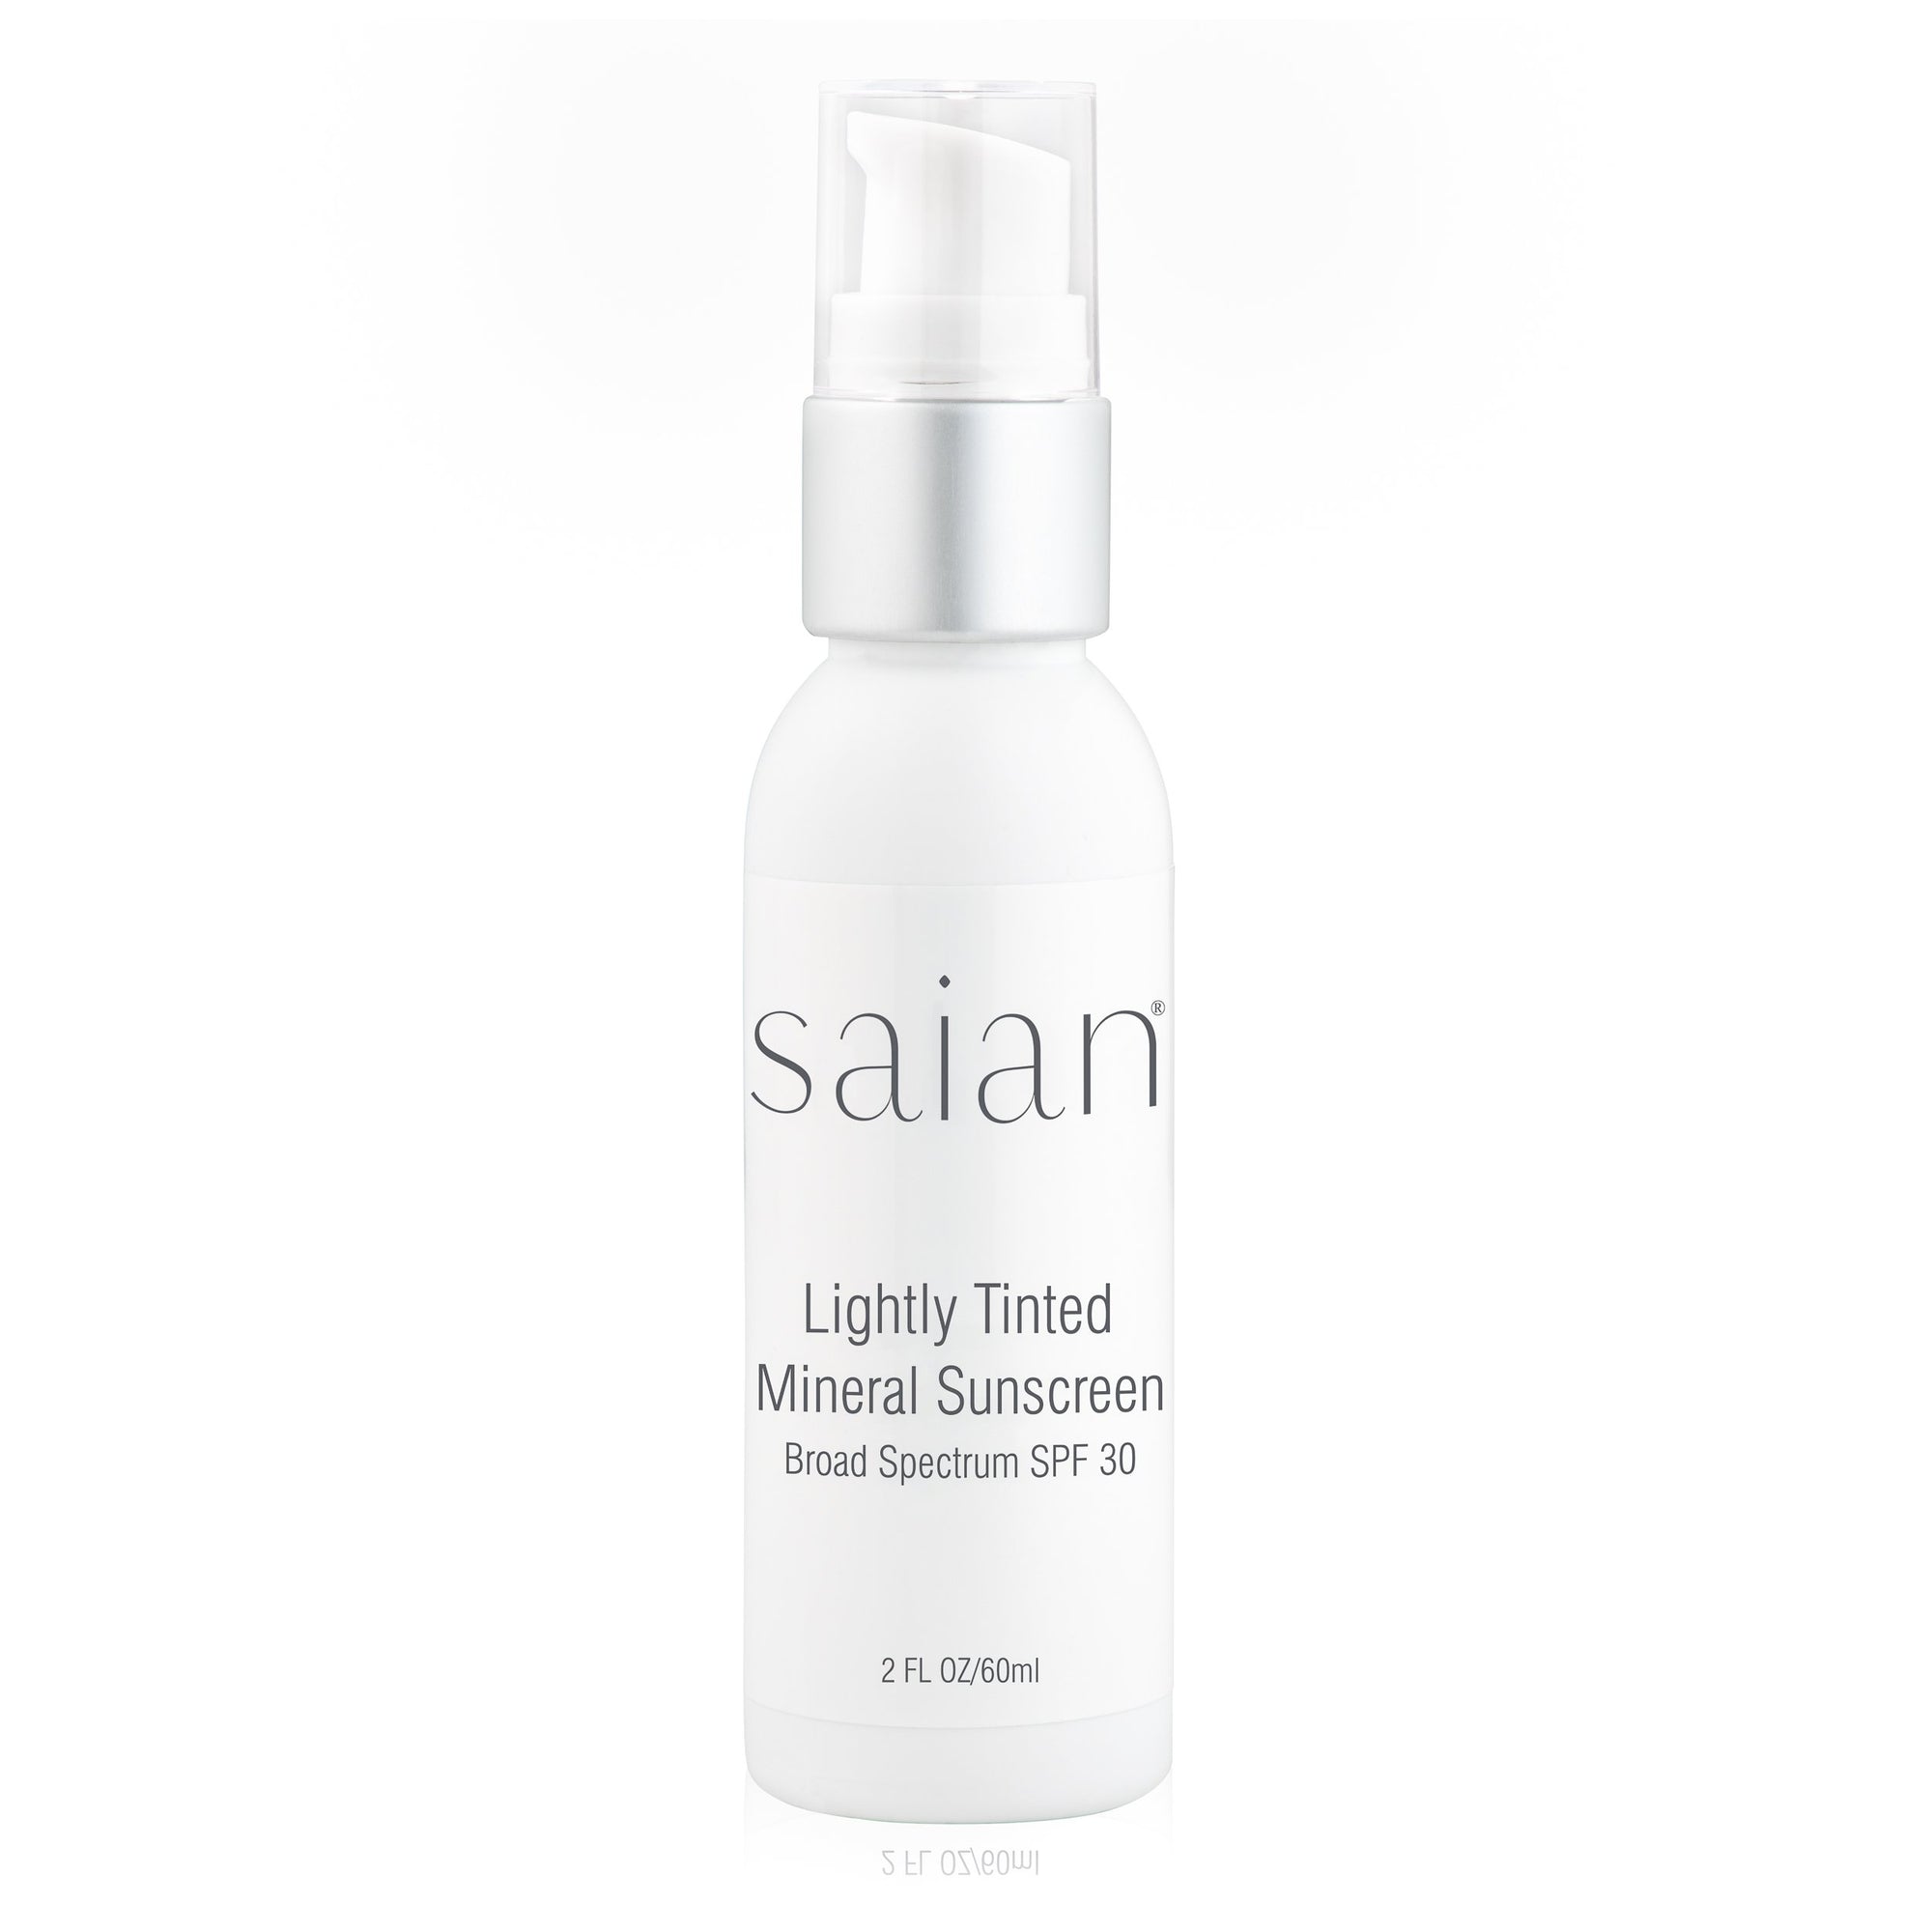 Saian Lightly Tinted Mineral Sunscreen SPF 30